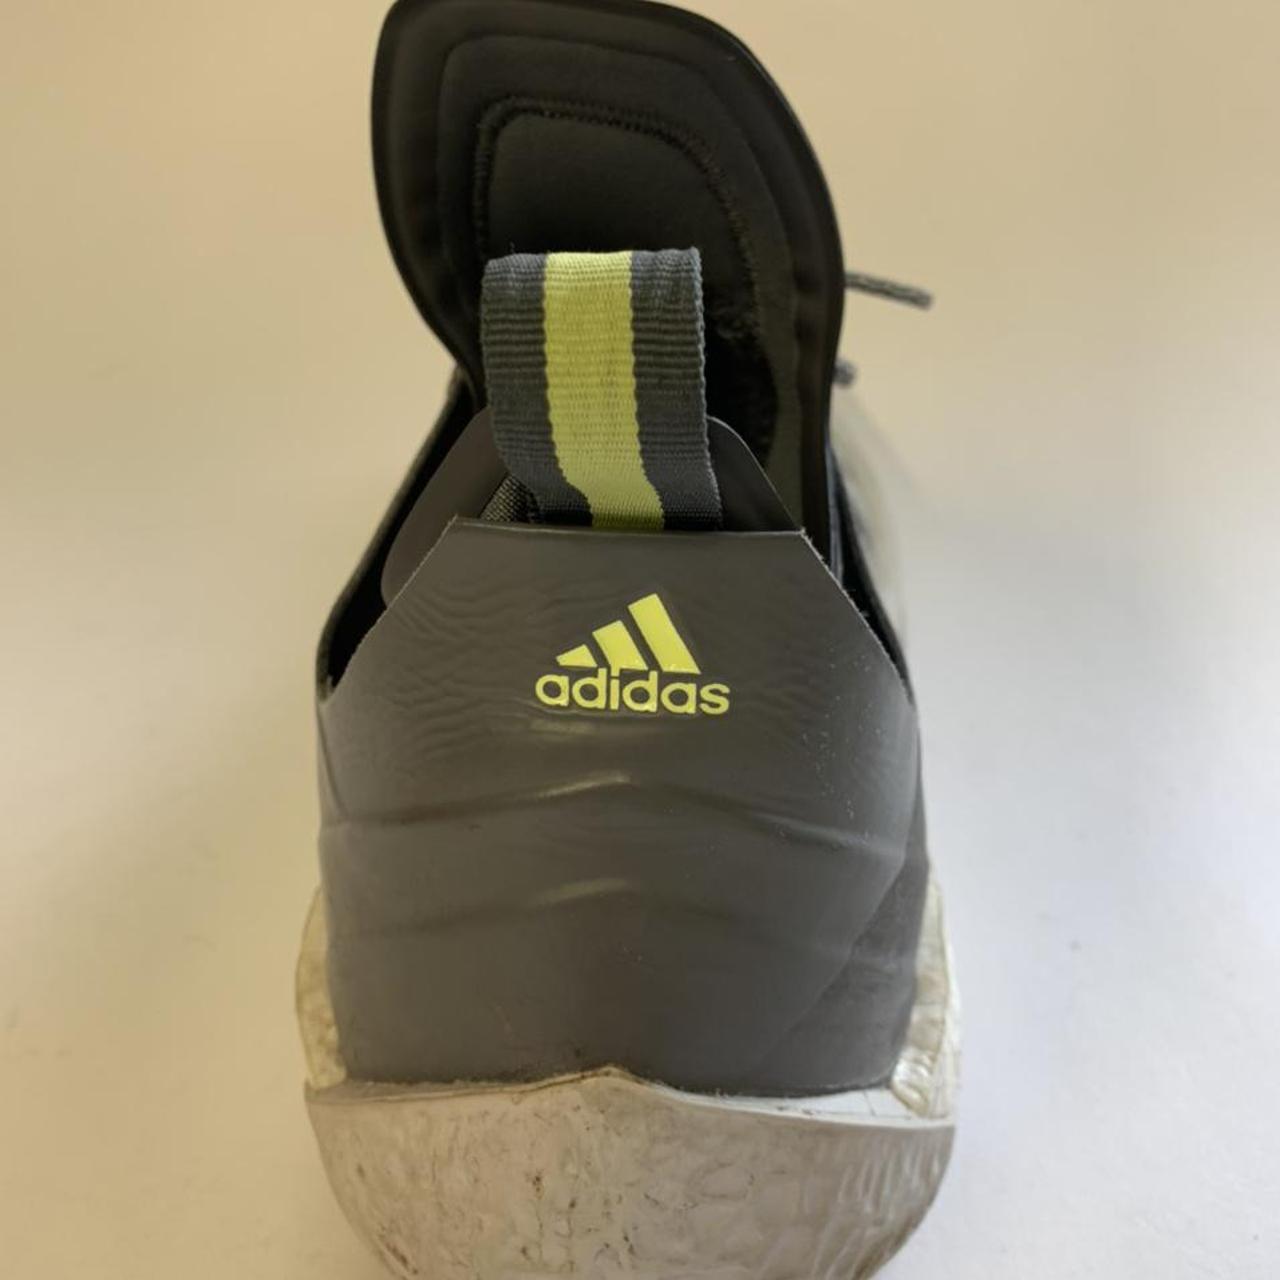 Adidas Men's Grey and White Trainers (4)